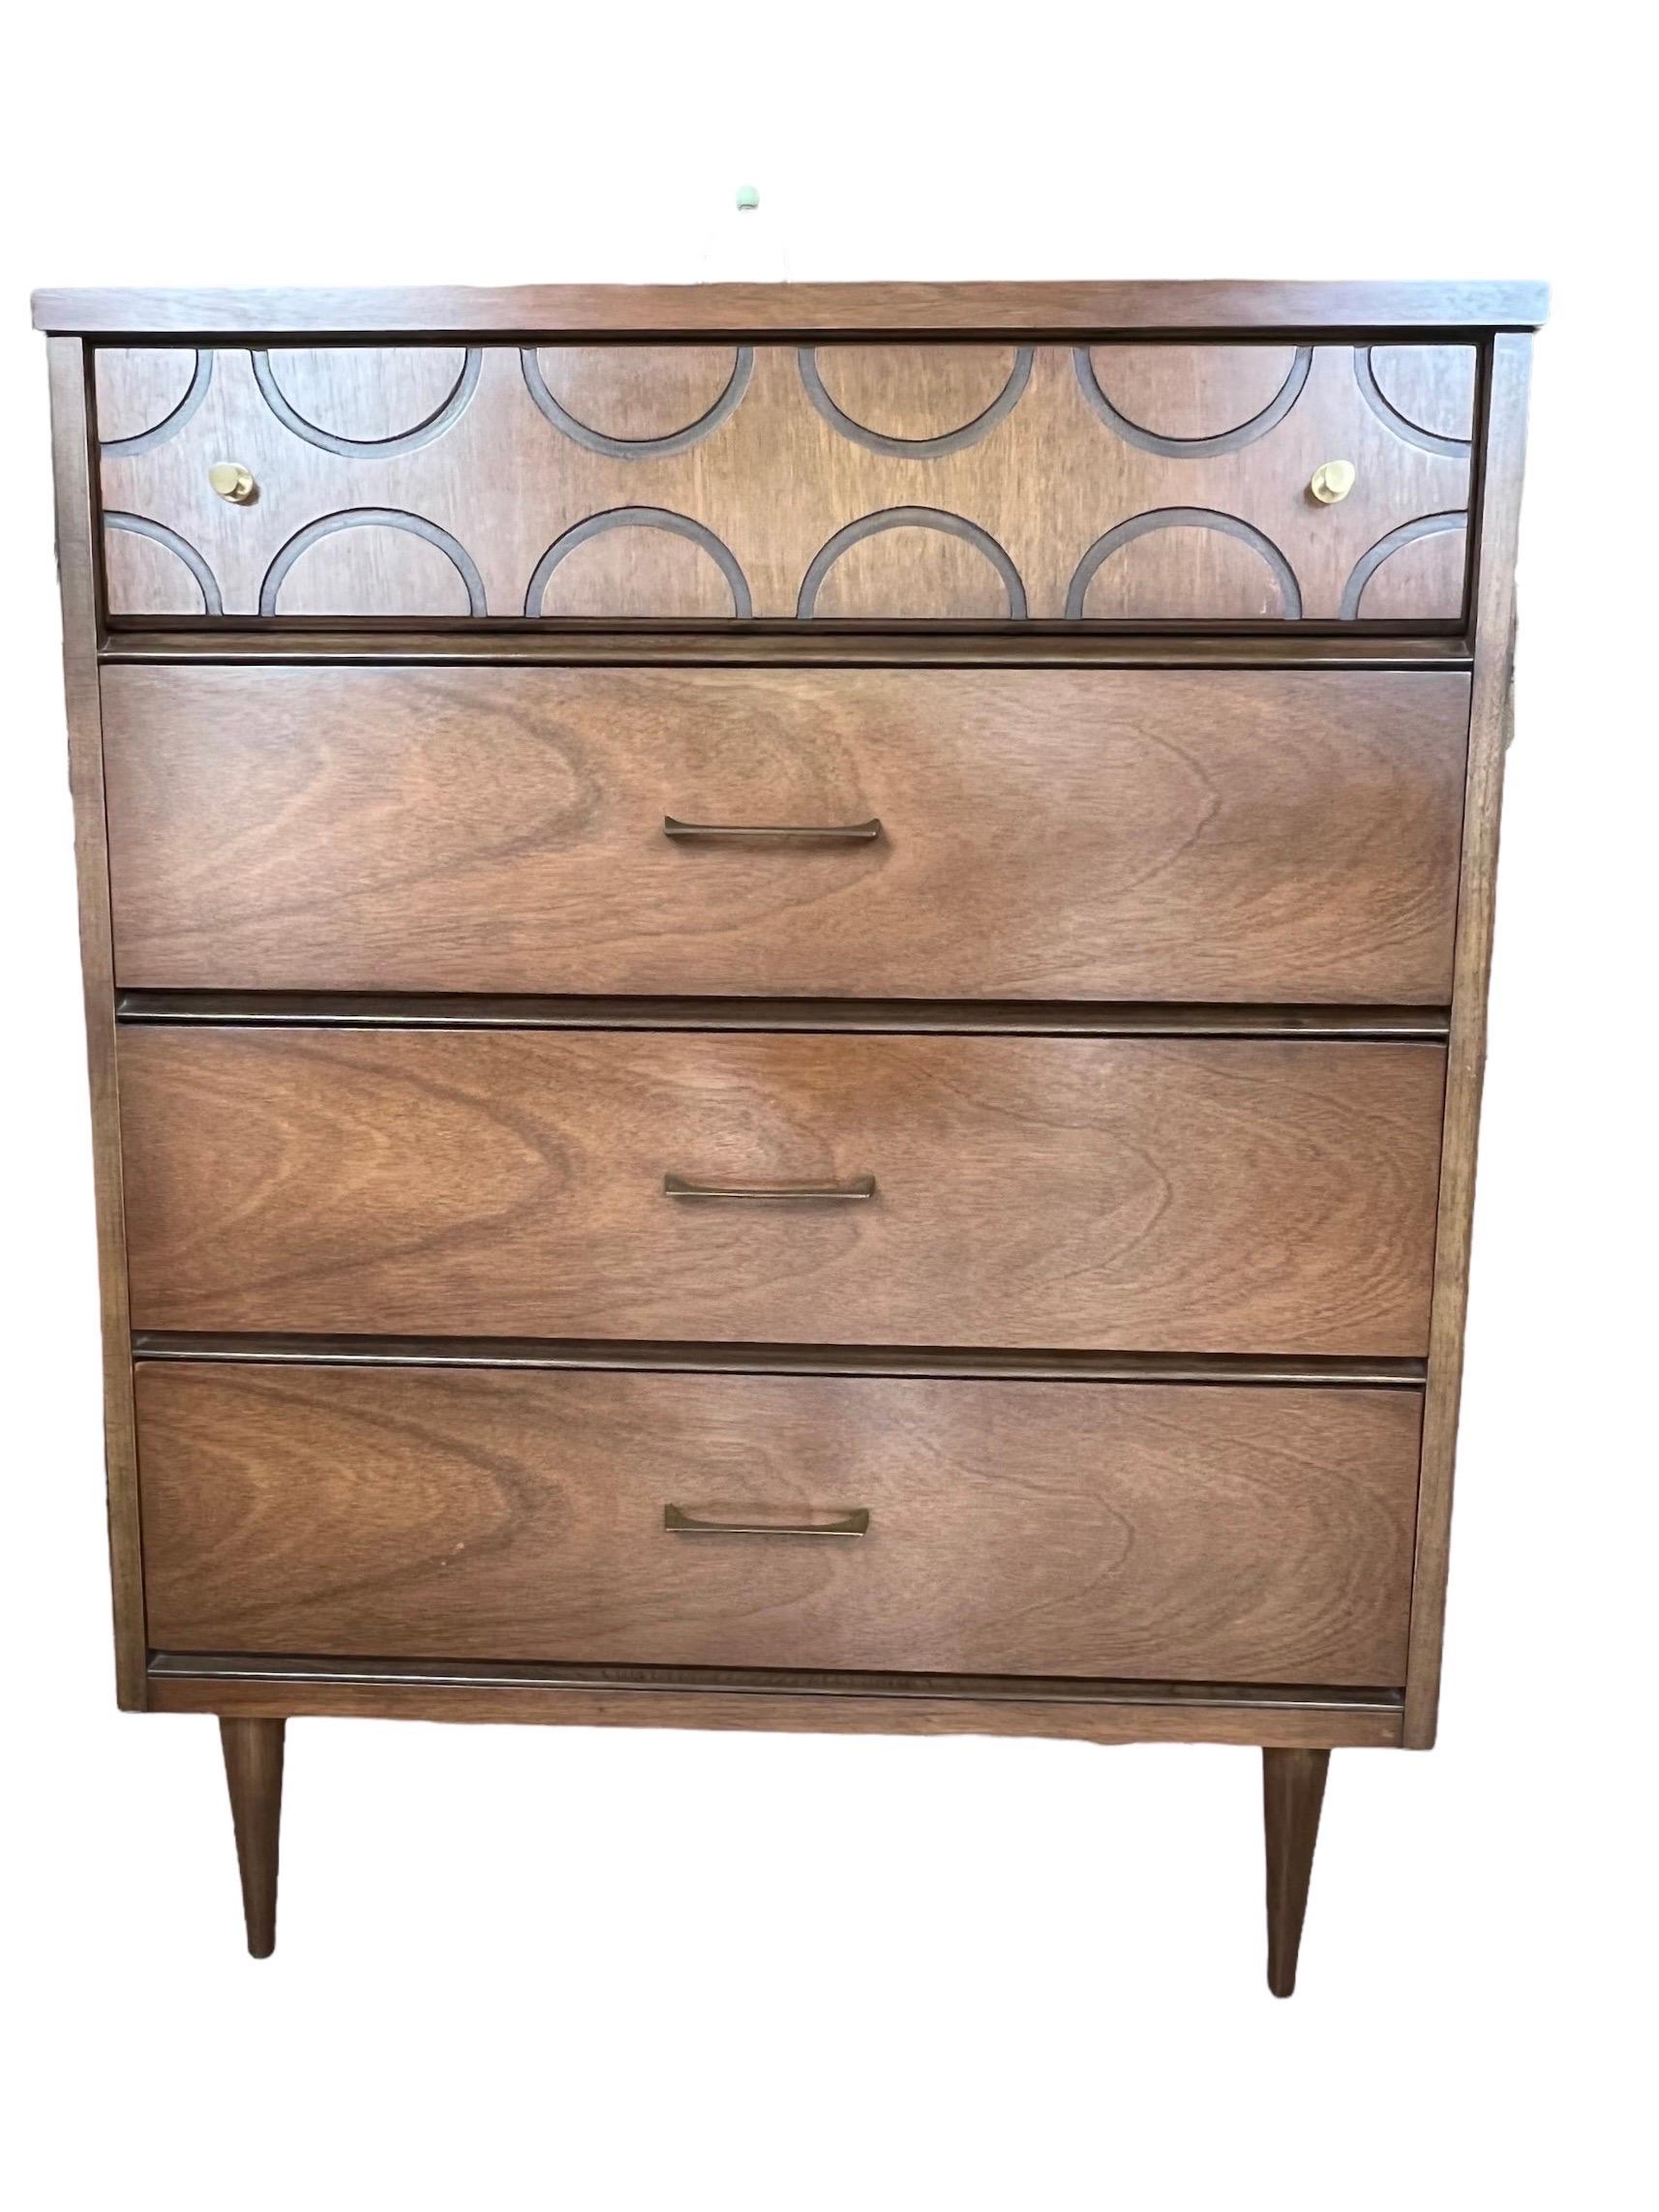 We have a beautiful Lane mid-century dresser available. The dresser has clean-lines and looks very sophisticated. This classic dresser is composed of solid walnut and original brass hardware.

Tallboy Dimensions: 34